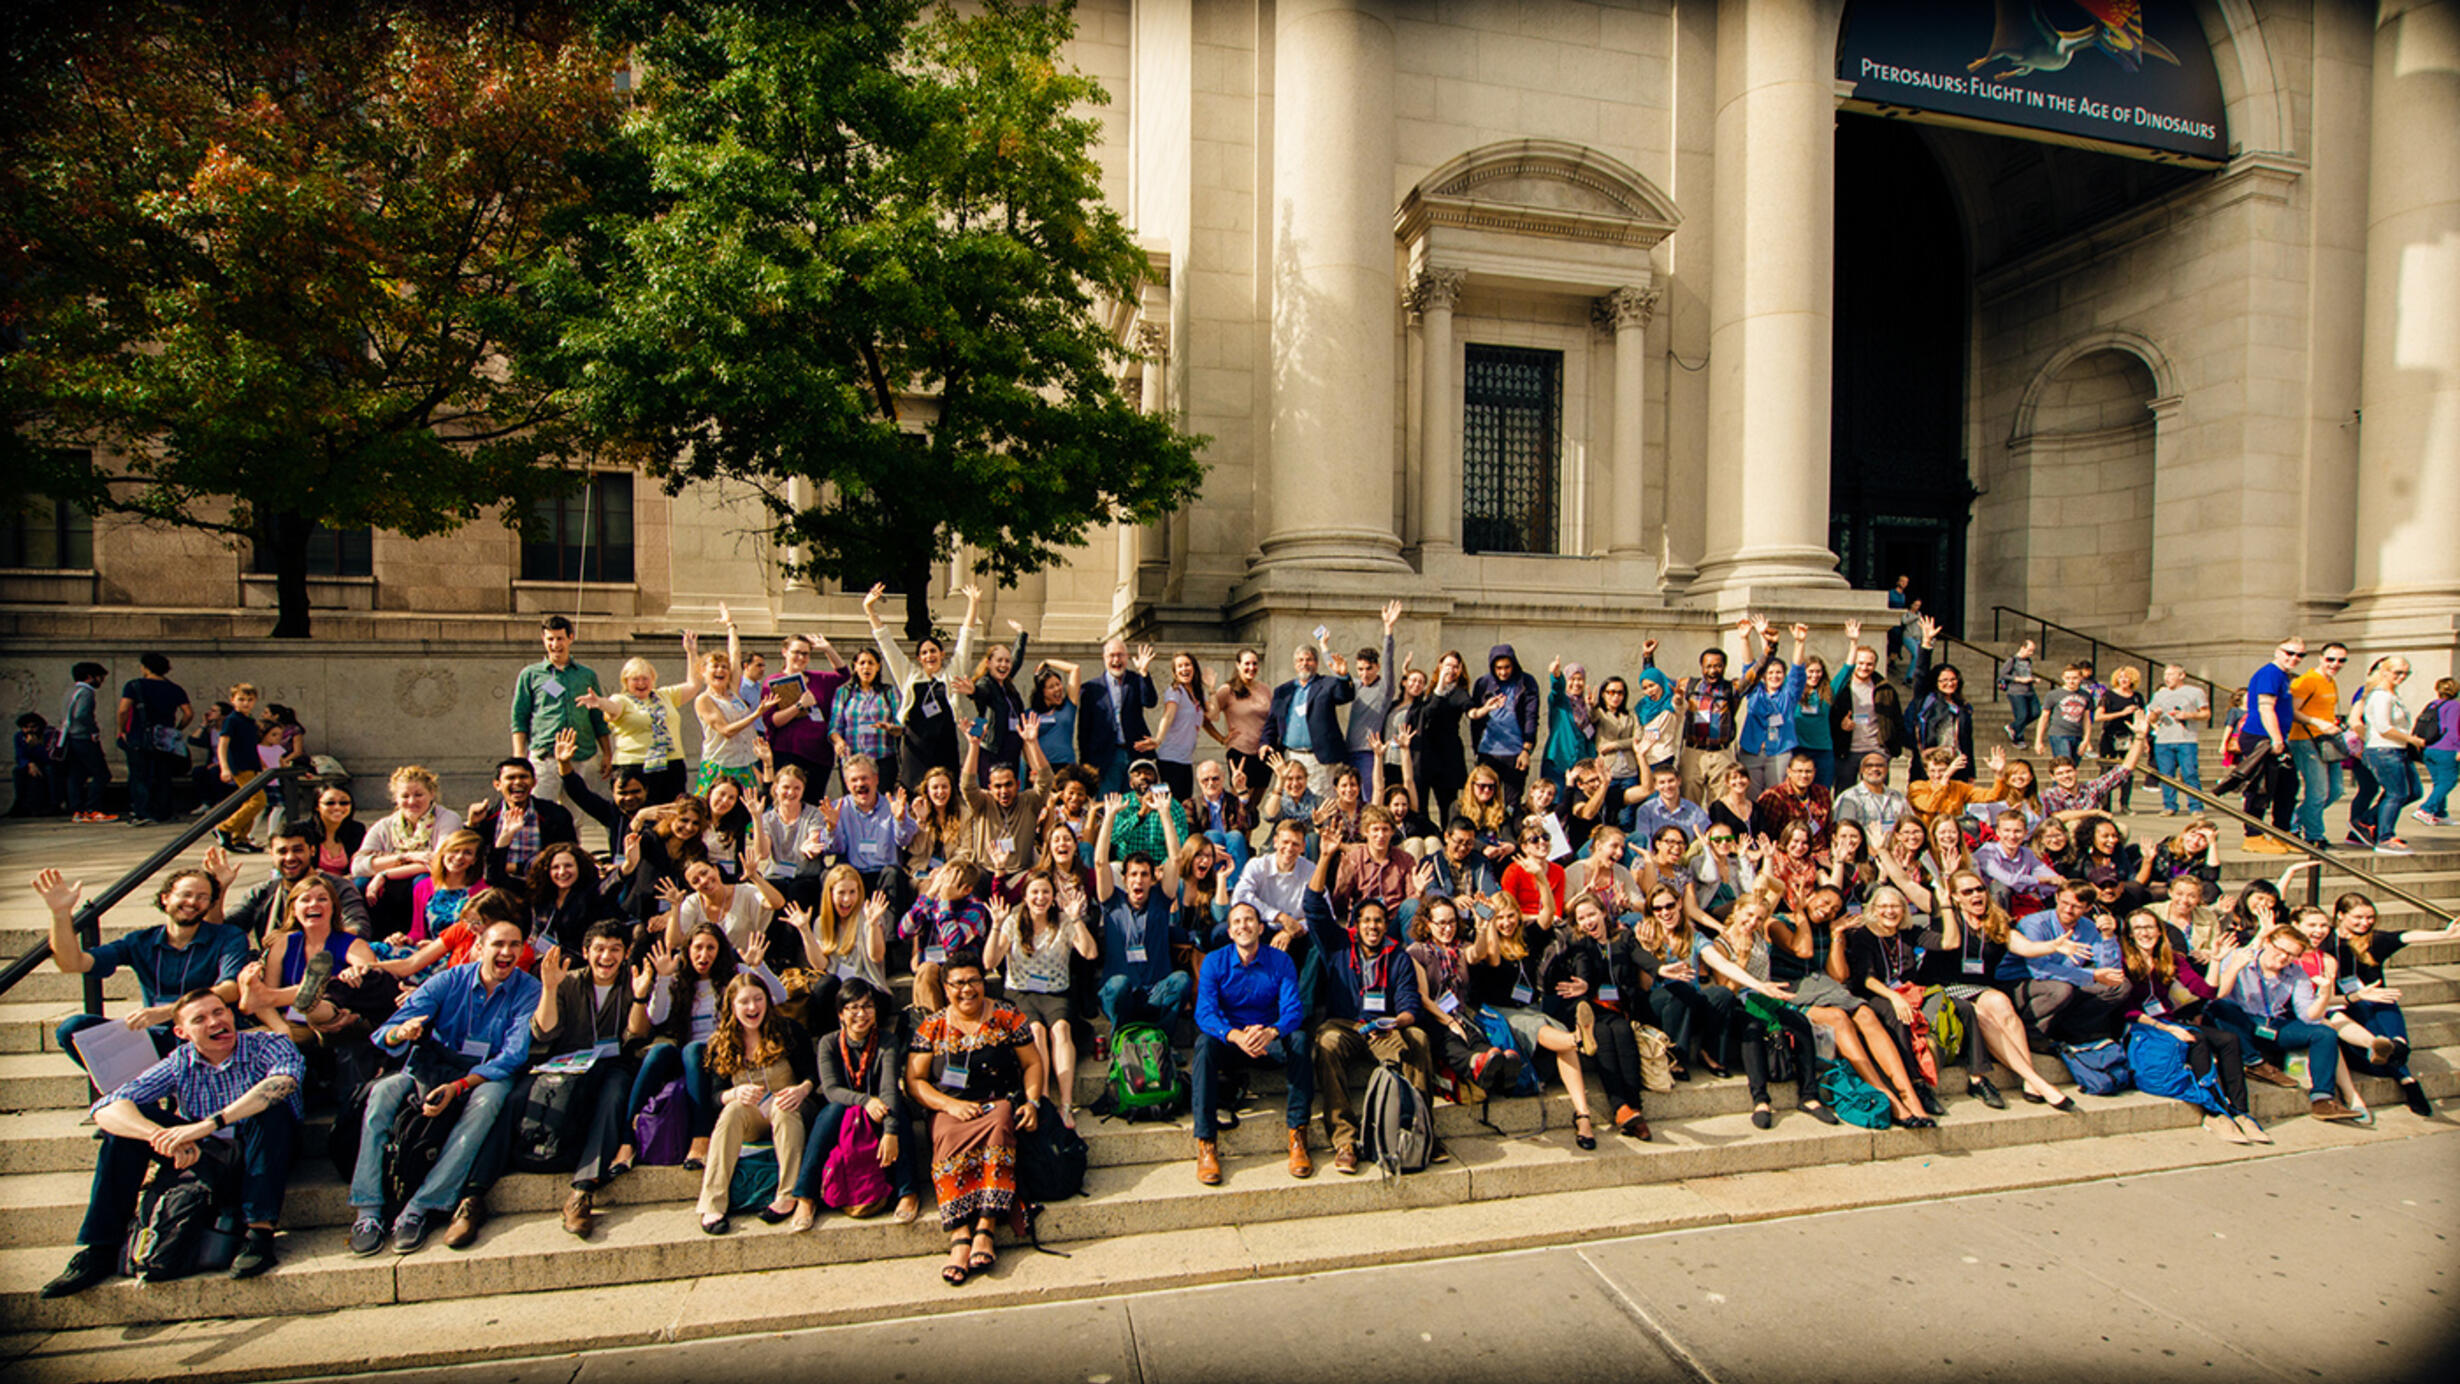 Group photo with about 100 people seated in rows or standing on the steps of the Museum's Central Park West entrance.